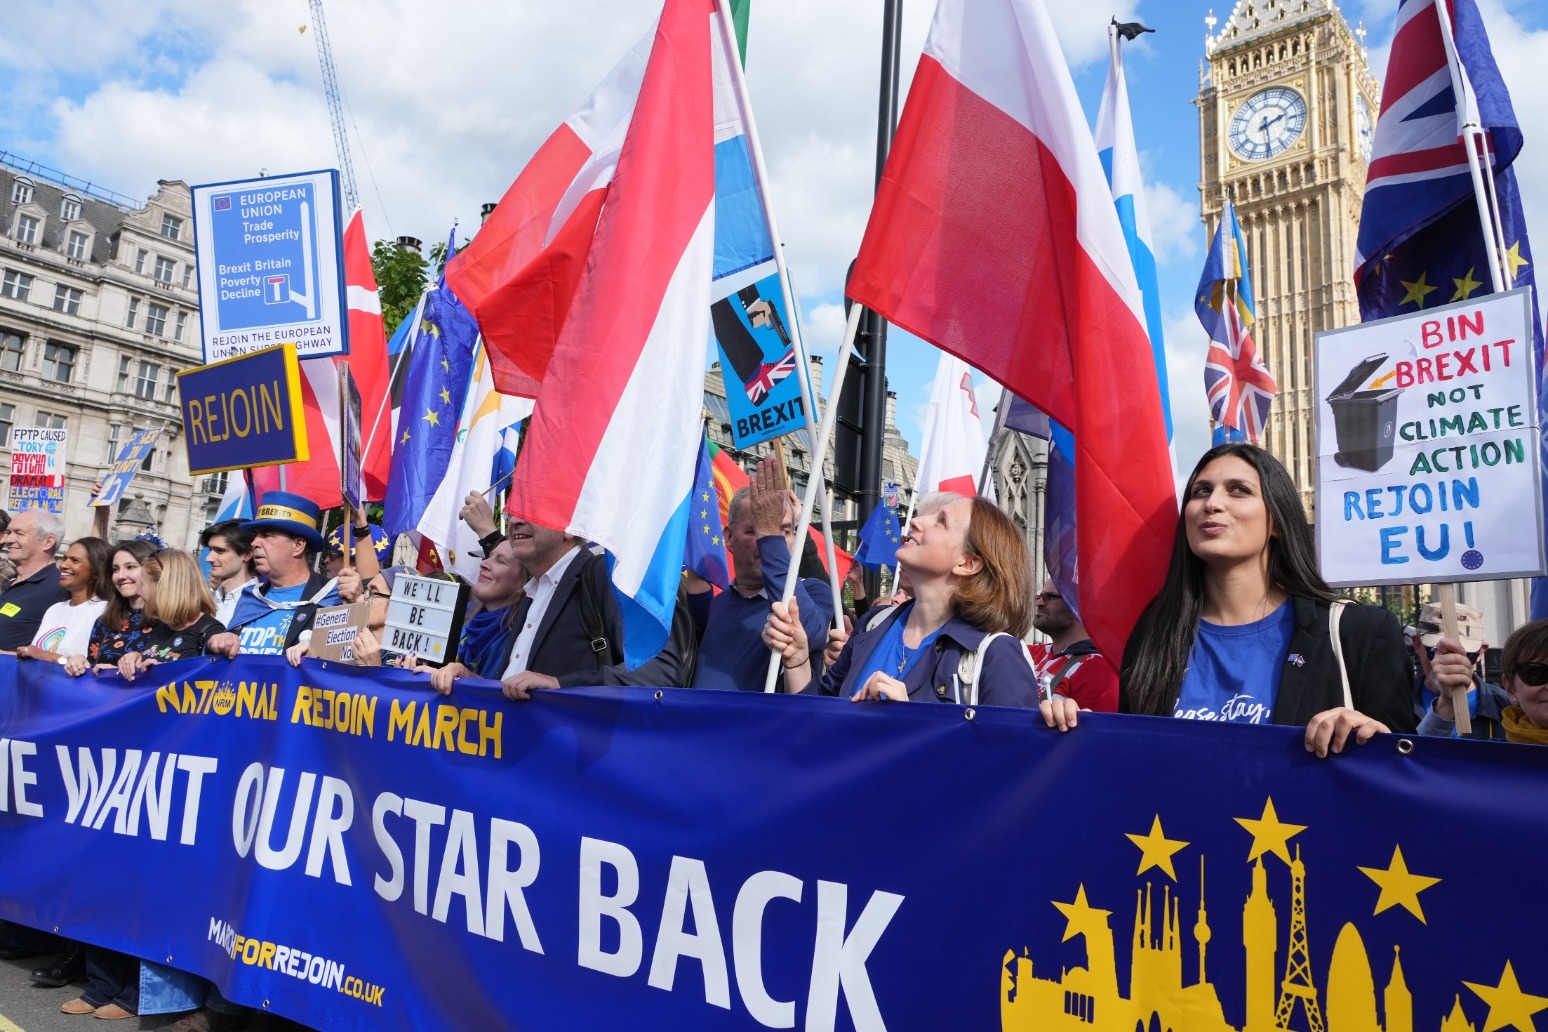 Brexit branded ‘a huge mistake’ as protestors march to re-join EU 